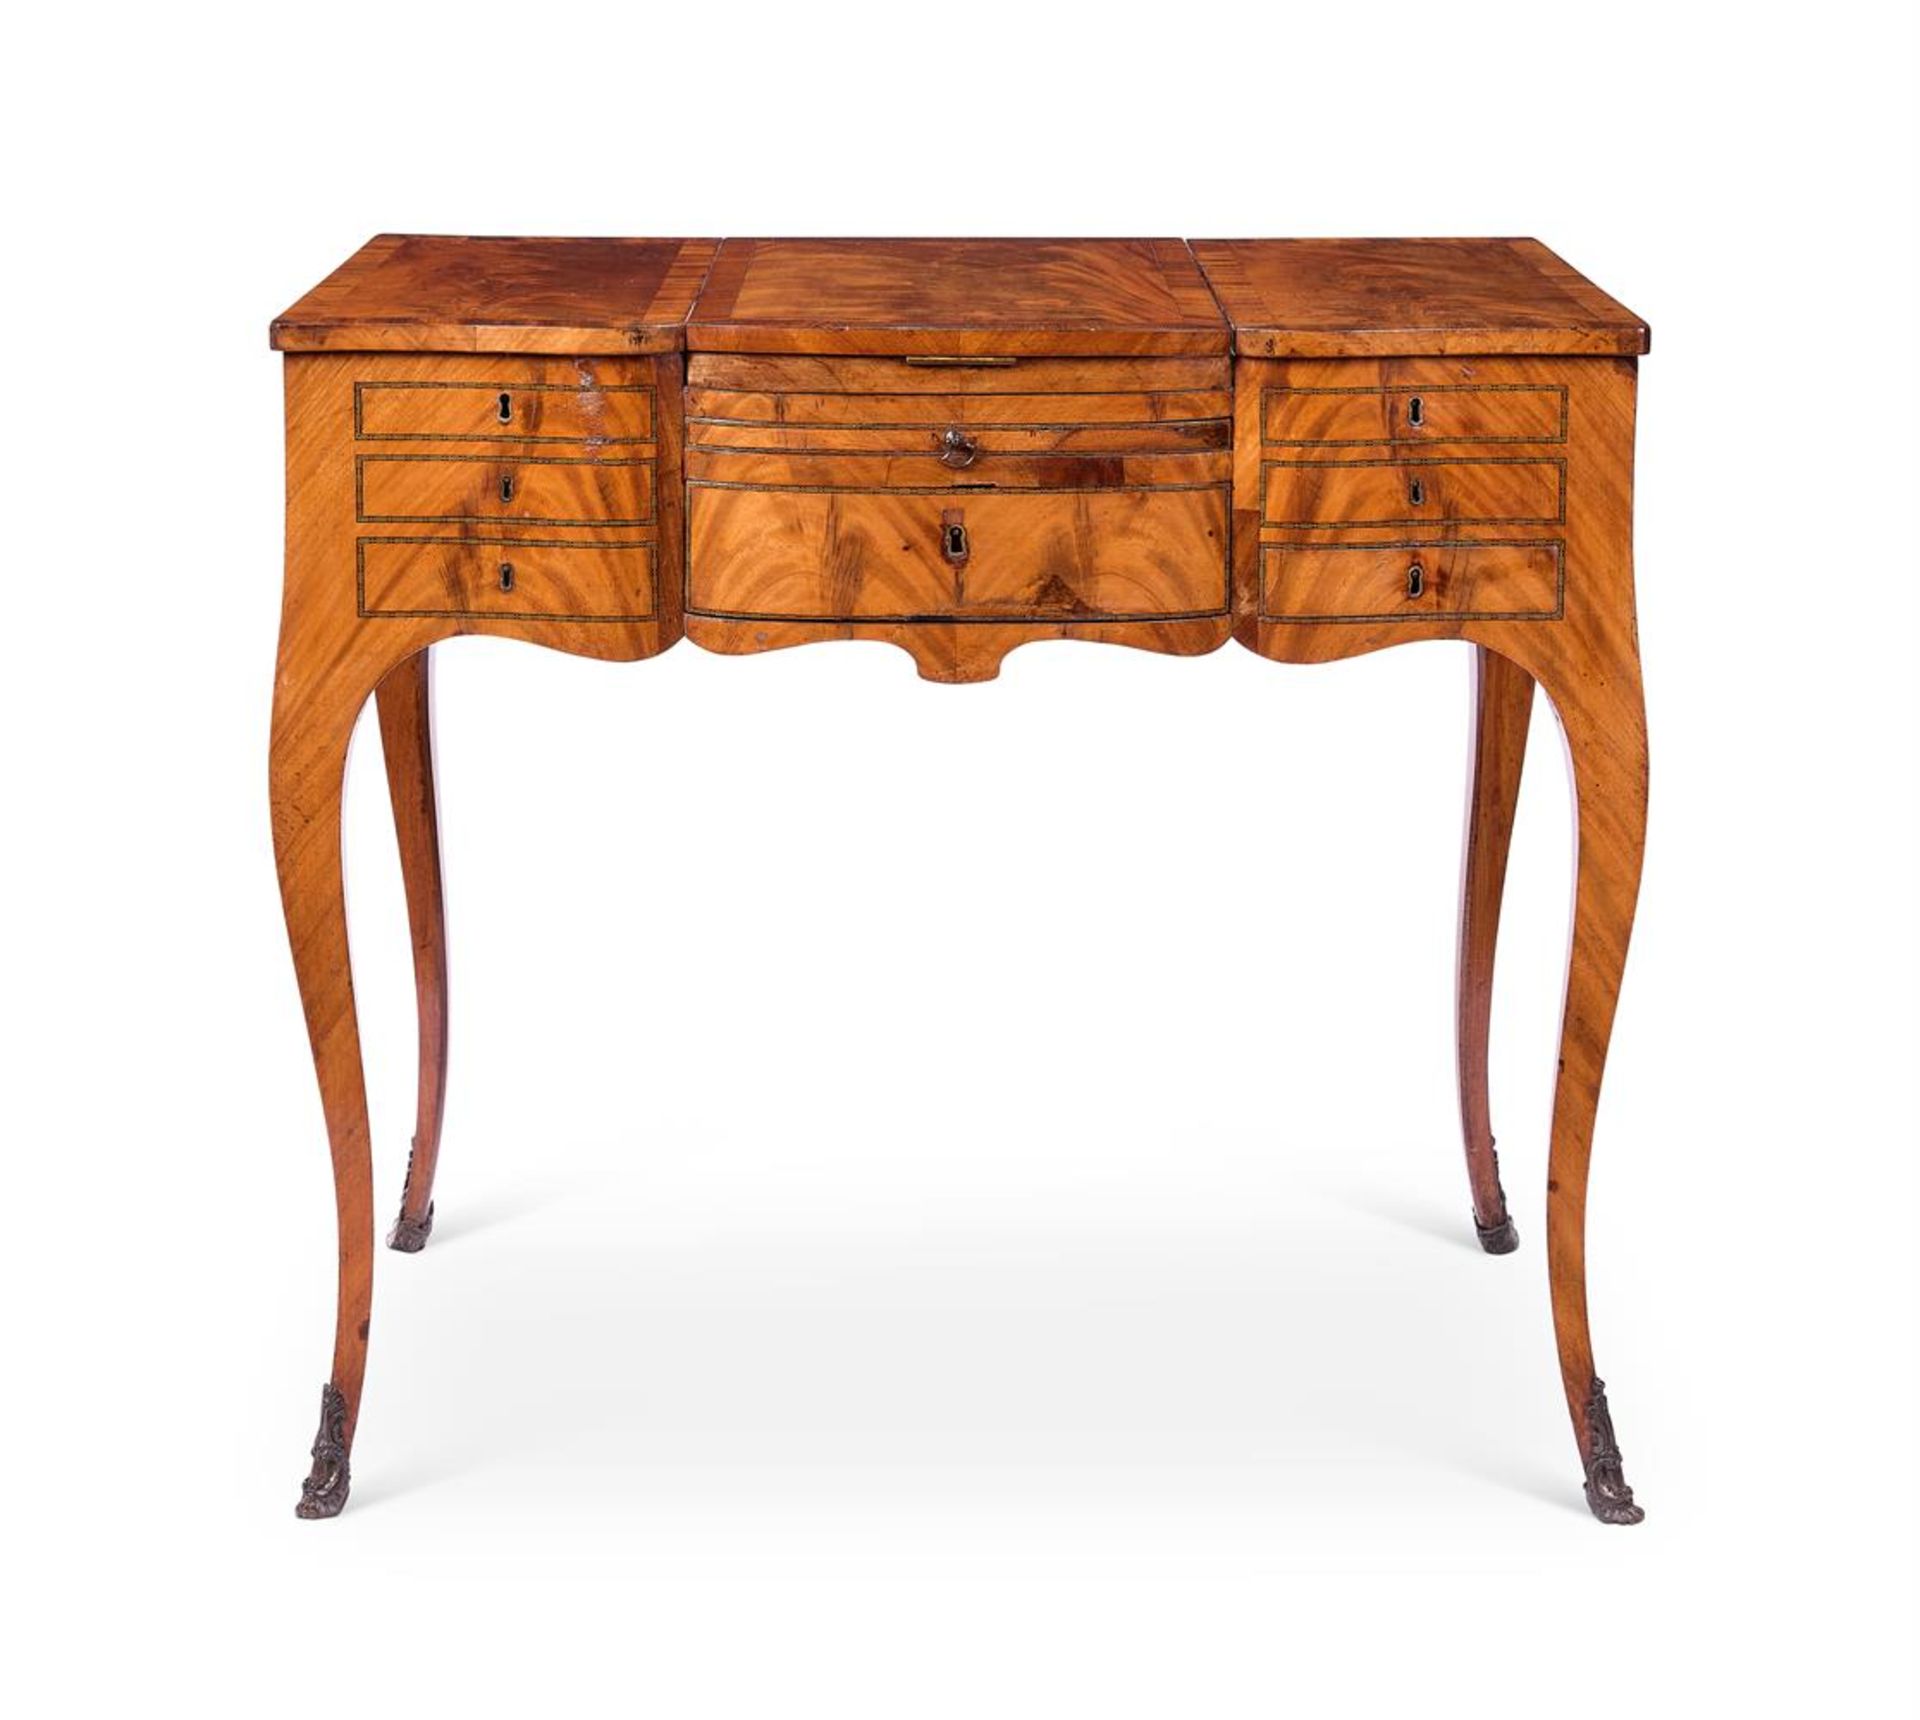 A VICTORIAN MAHOGANY BRASS-MOUNTED DRESSING-TABLE OR POUDREUSE CIRCA 1870 OF LOUIS XV STYLE